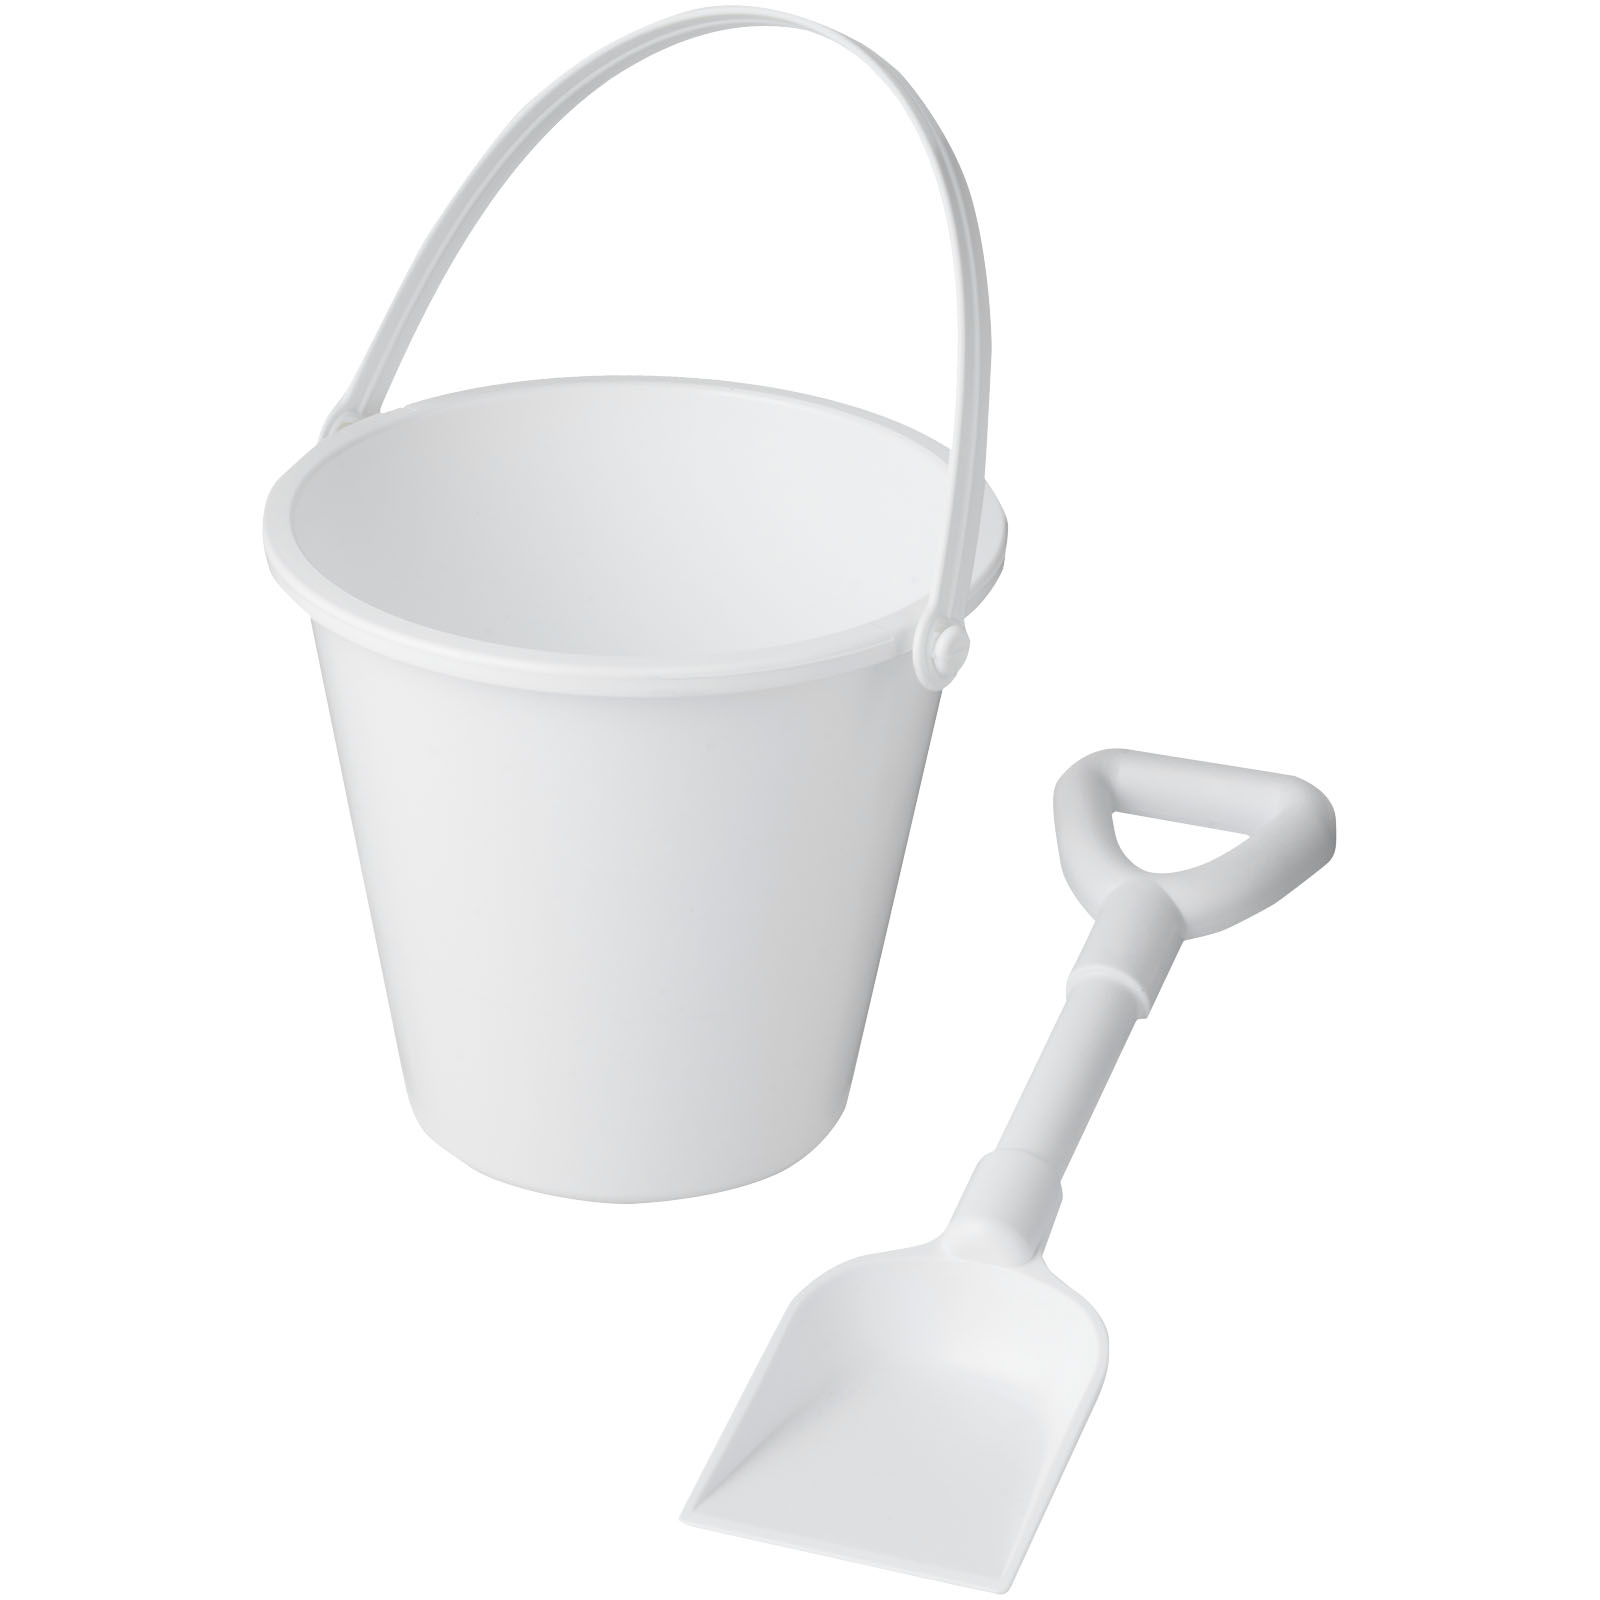 Advertising Beach Items - Tides recycled beach bucket and spade